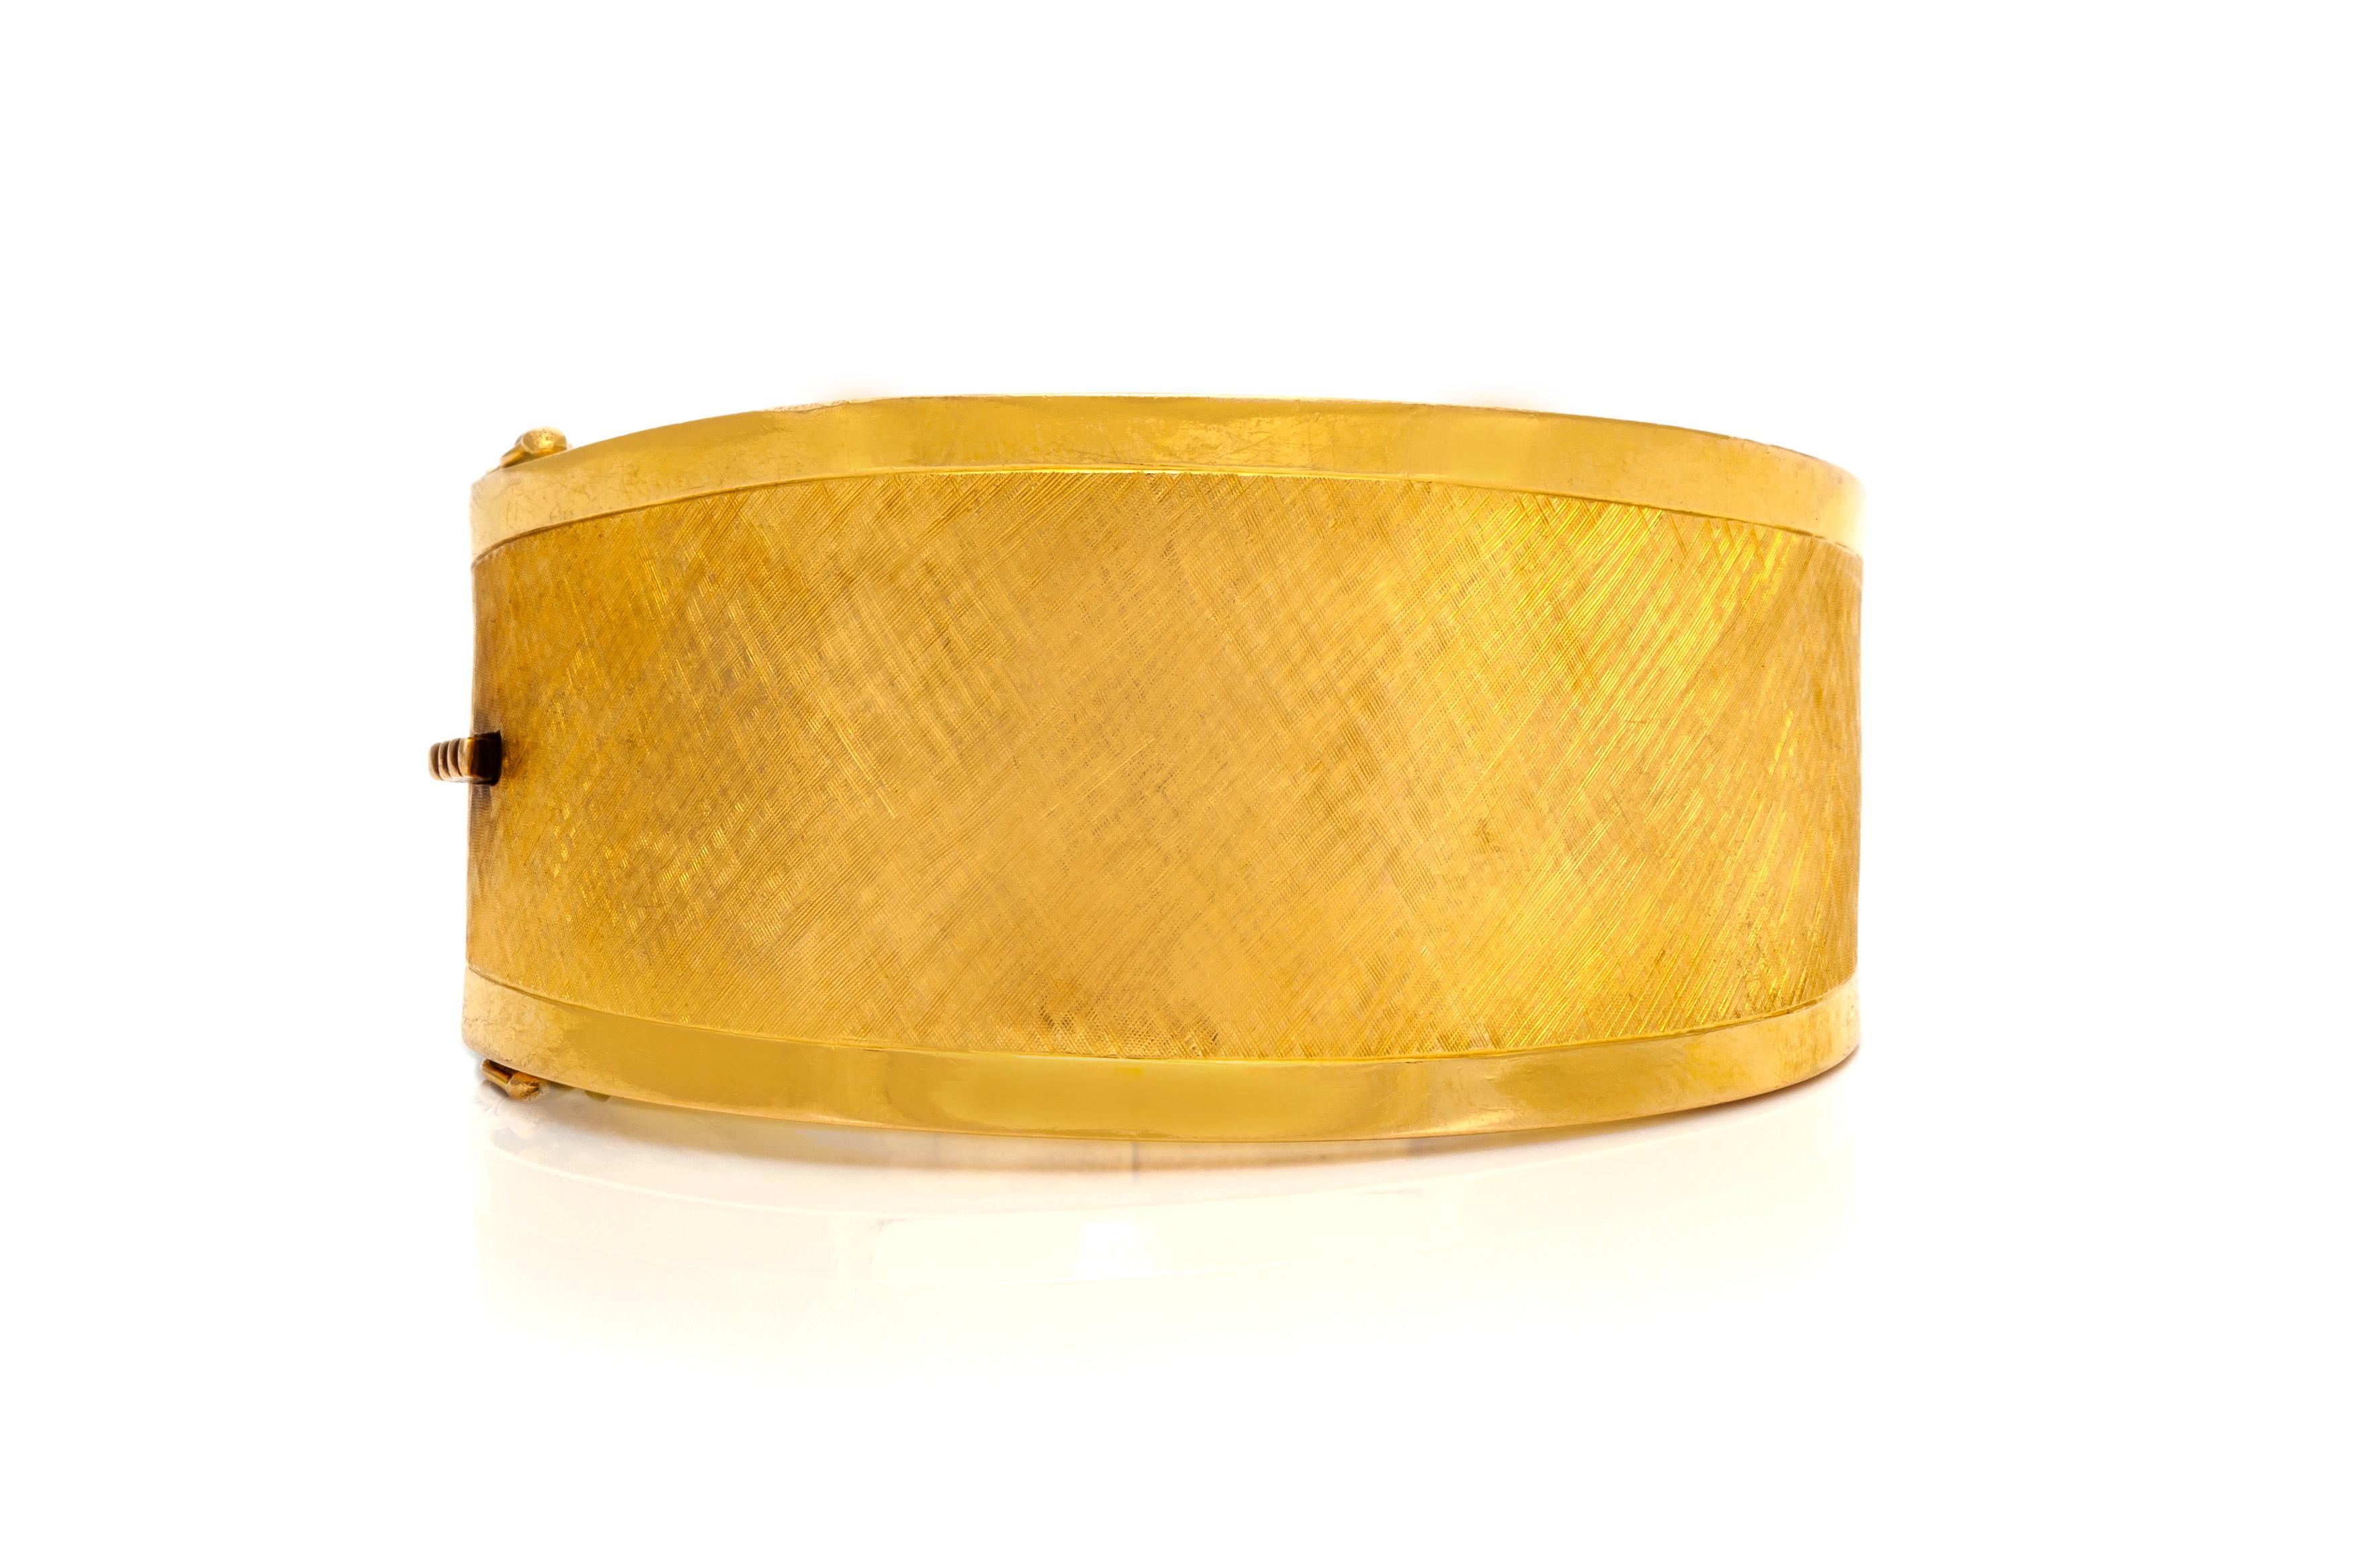 The bracelet is finely crafted in 18k gold and weighing approxemately 54.8 DWT.